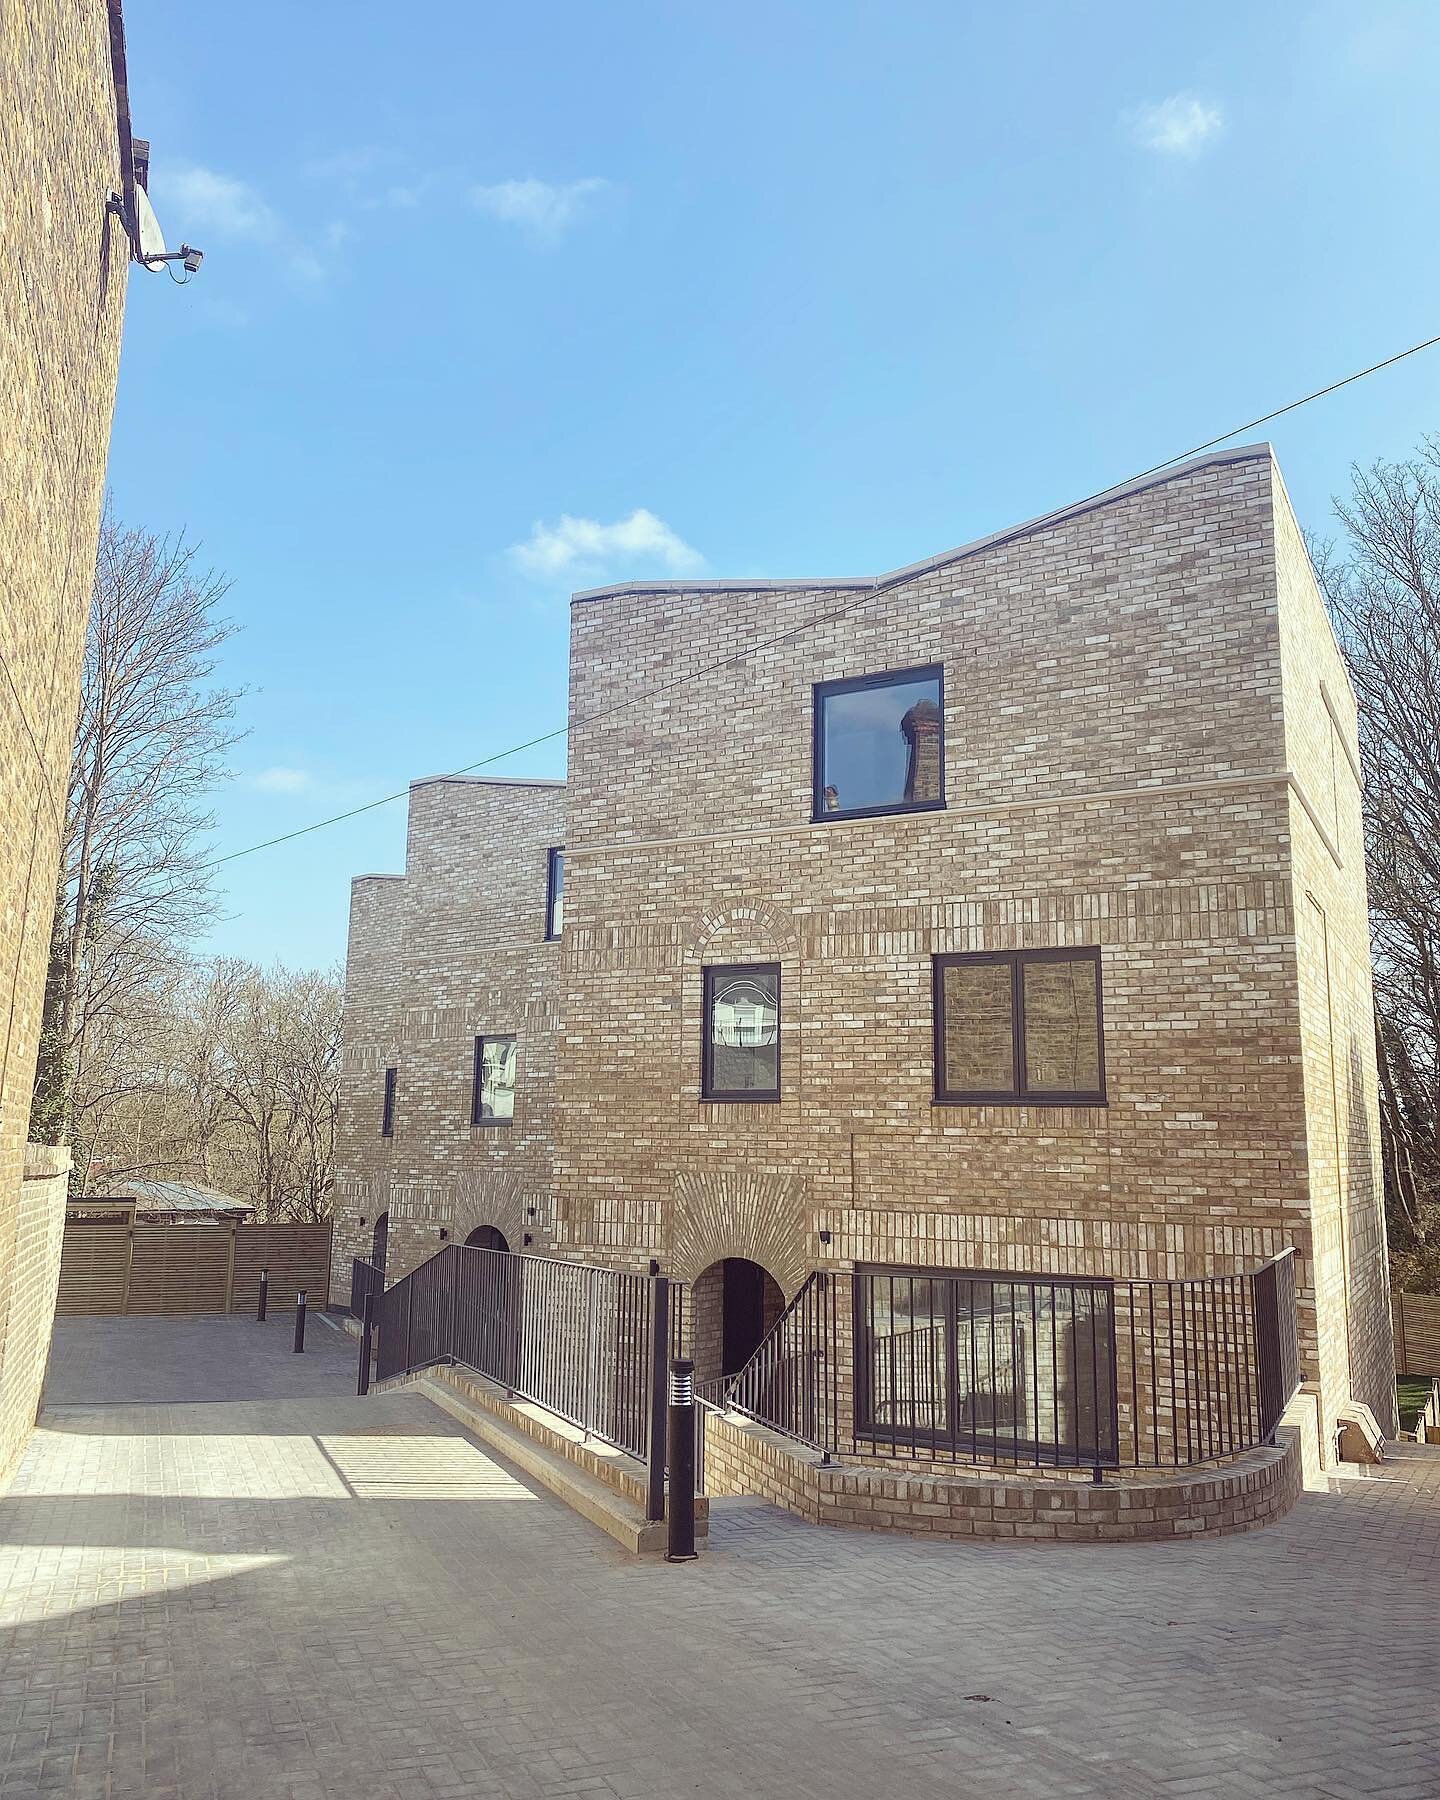 ALMA PLACE - 5 moved in, 1 to go! 

Located within a private woodland, Alma Place is a collection of six new-build duplex apartments. 

Just walking distance from the eclectic Crystal Palace triangle, the development is accessed via its own private r